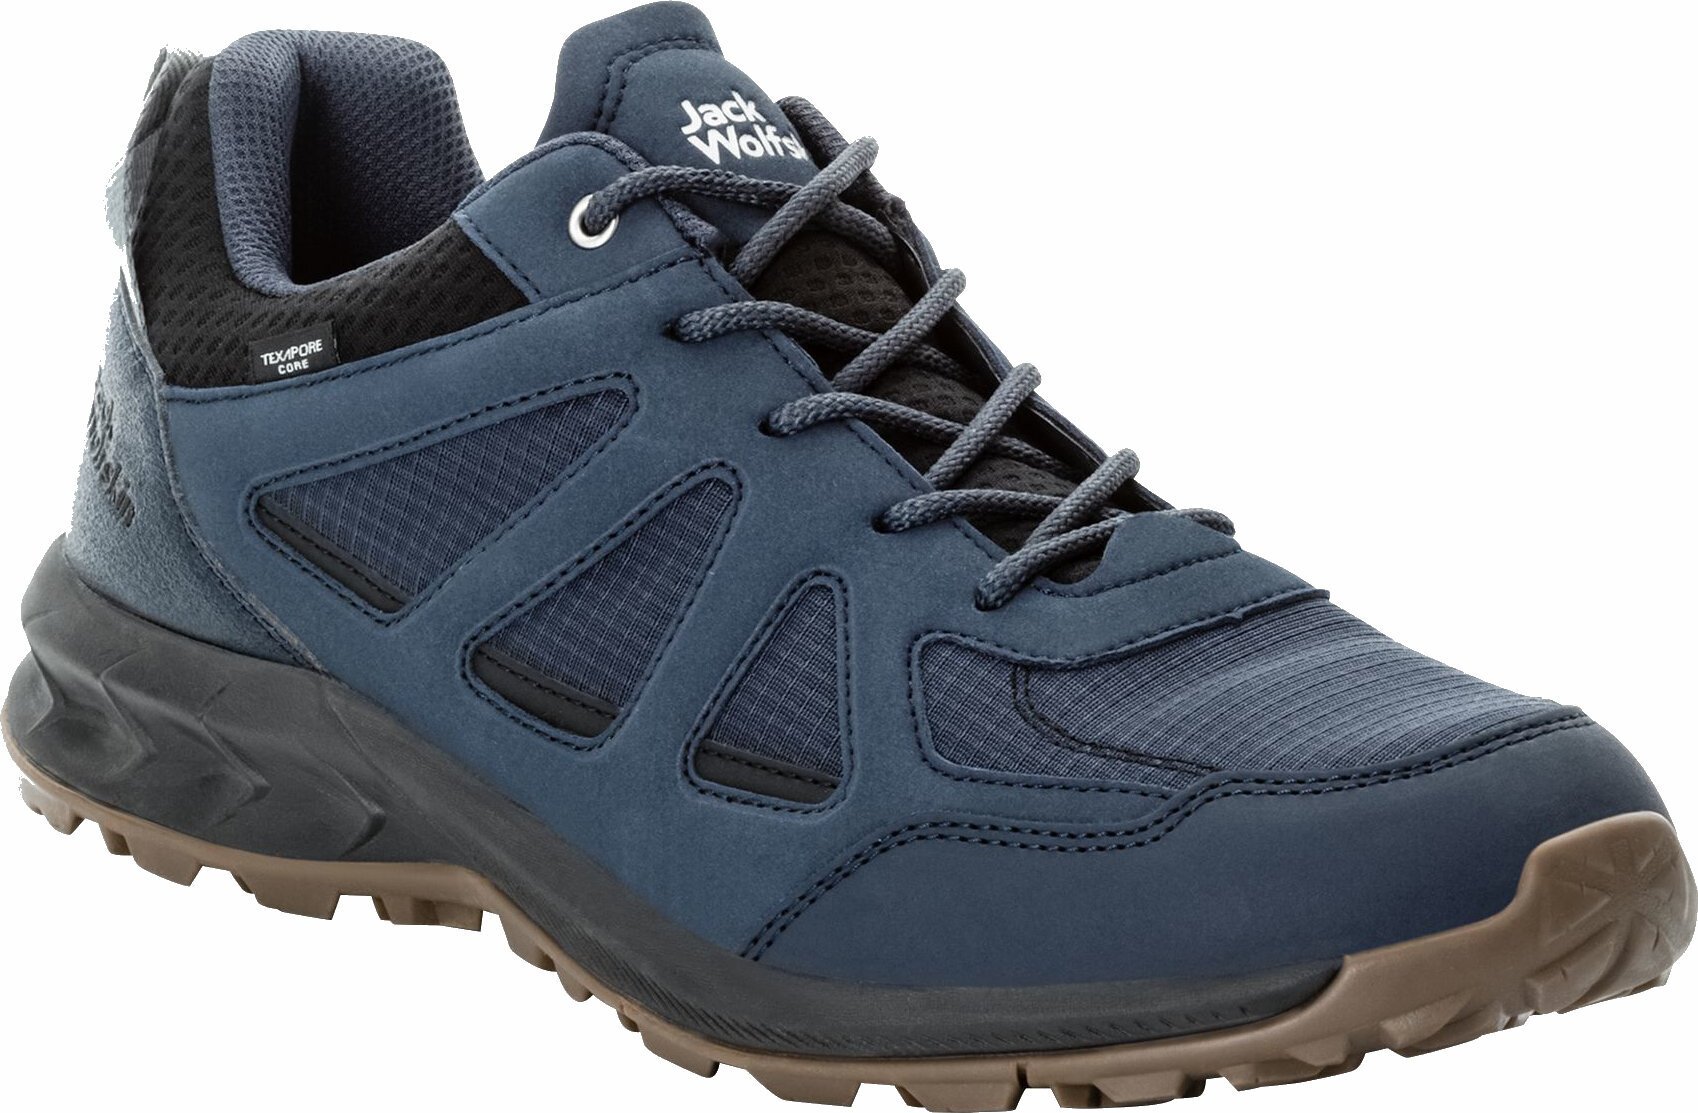 Mens Outdoor Shoes Jack Wolfskin Woodland 2 Texapore Low M Night Blue 44 Mens Outdoor Shoes